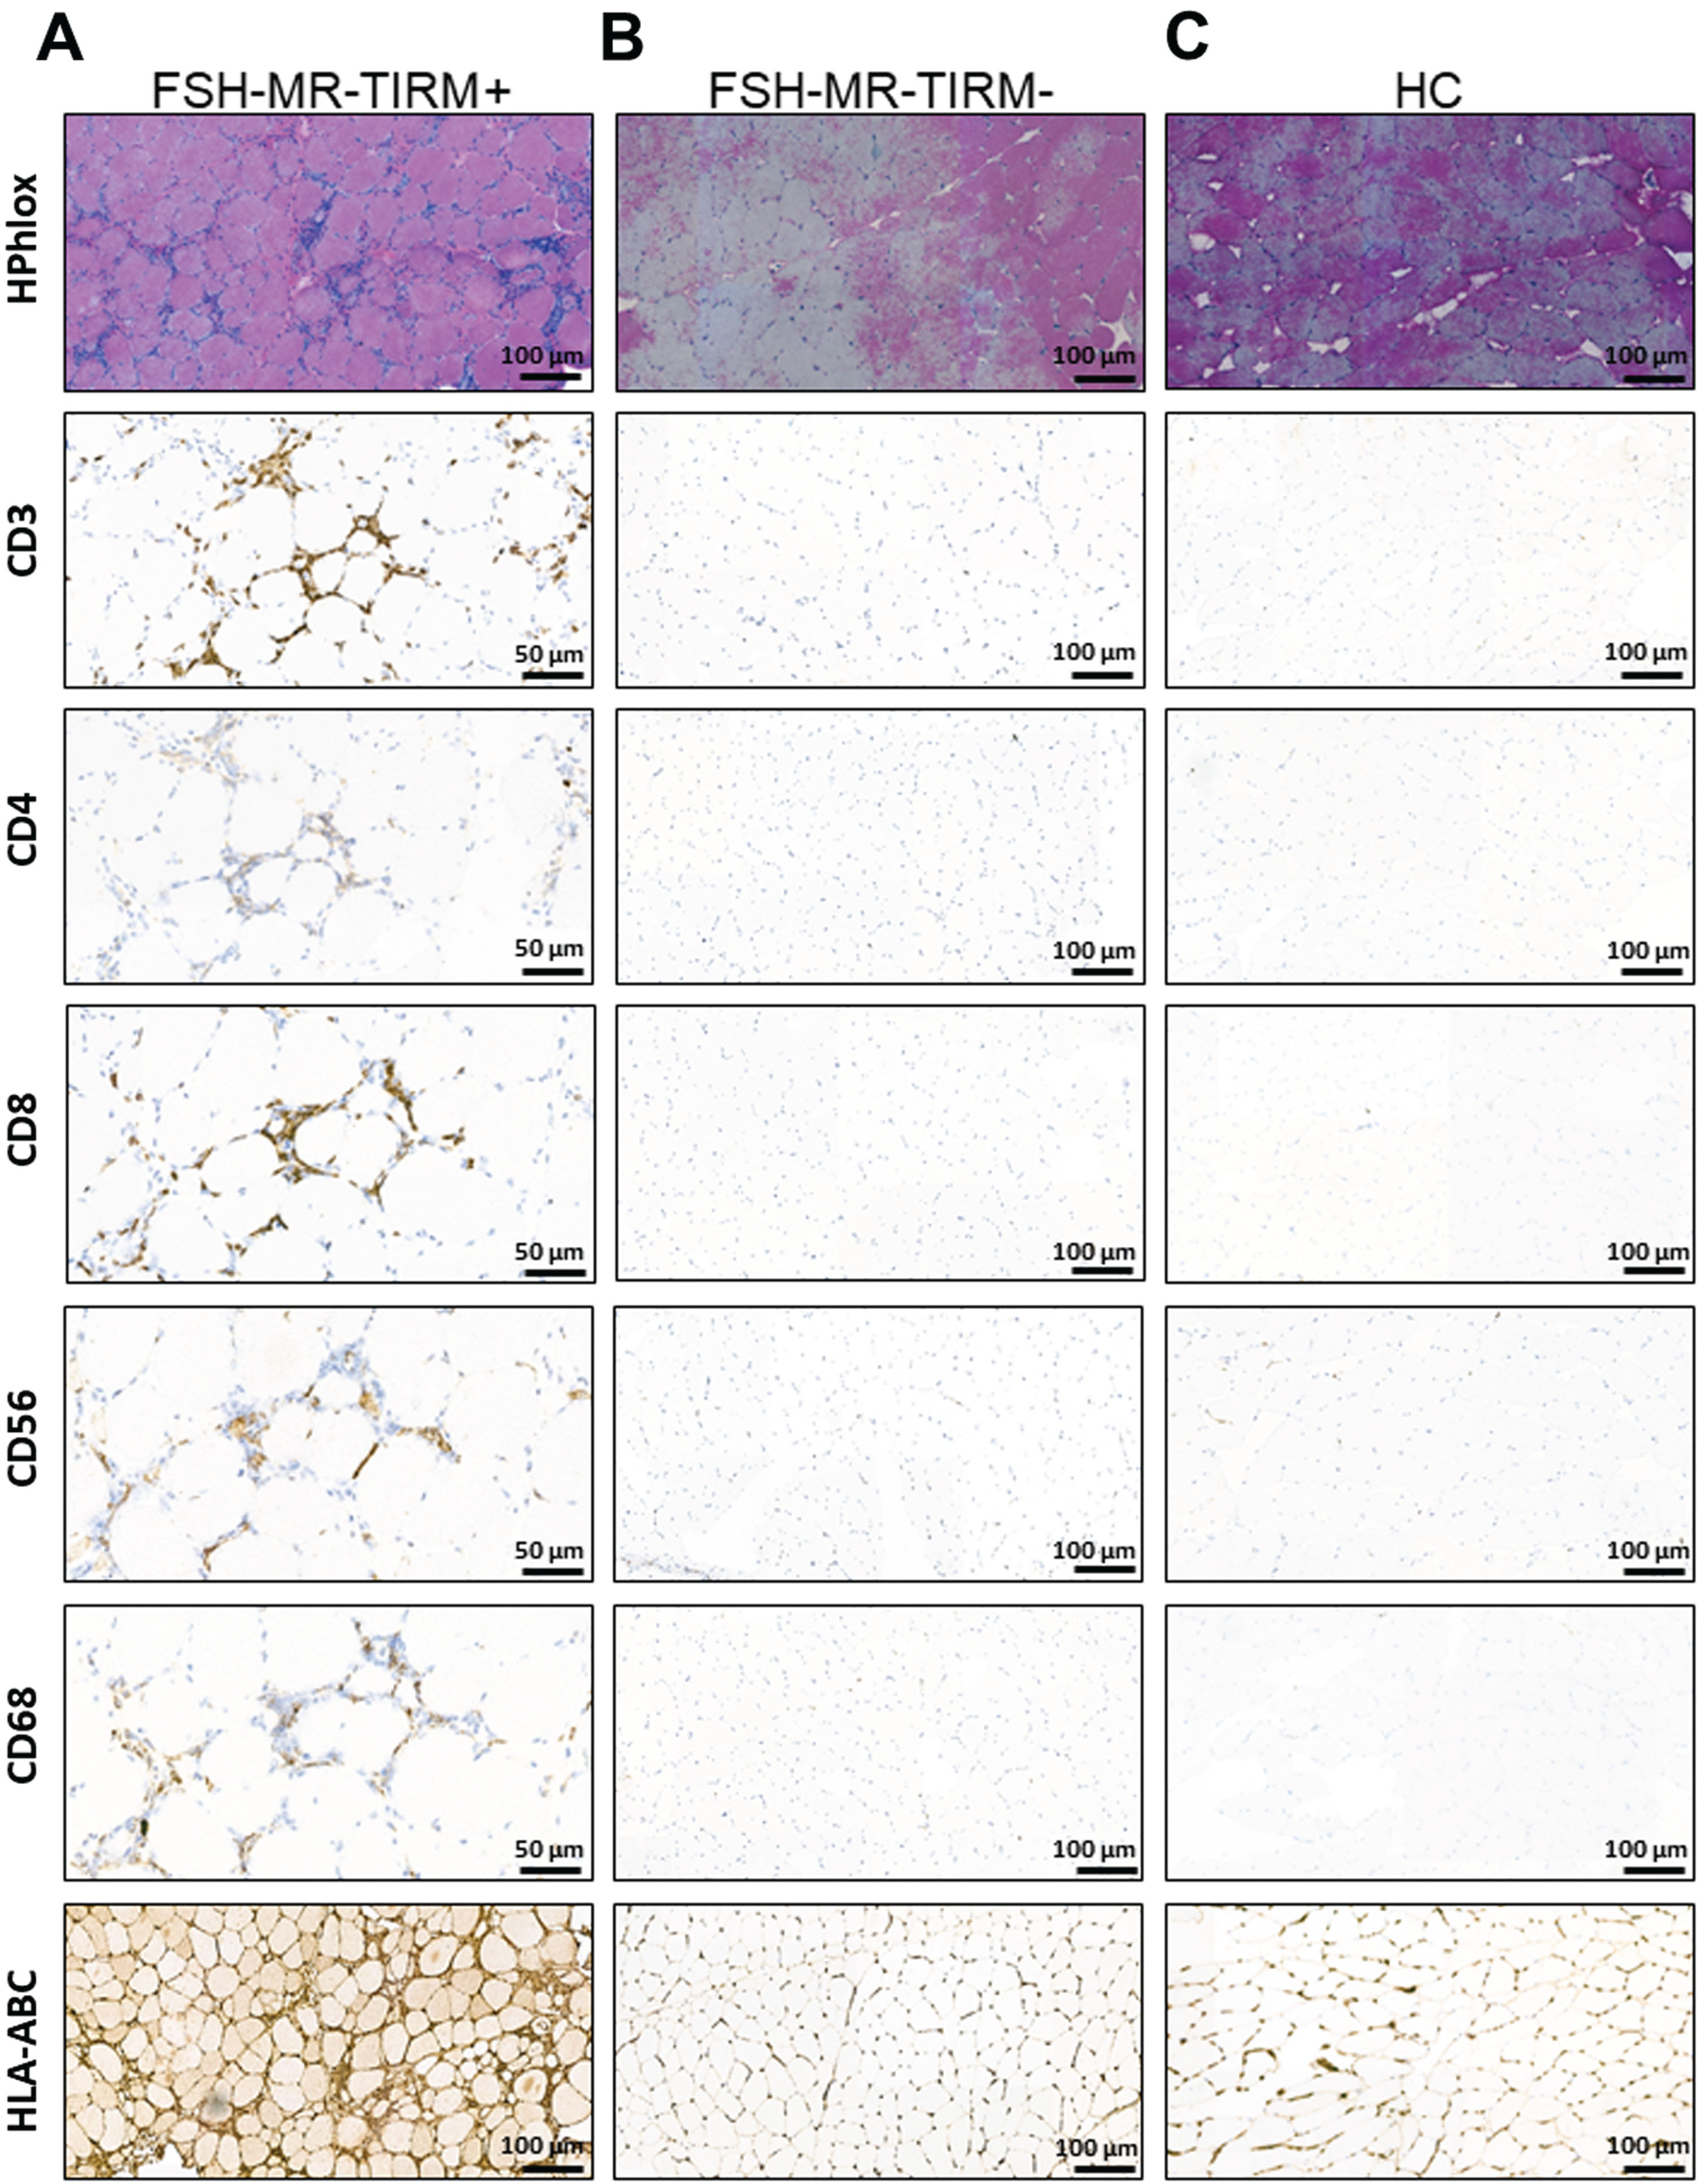 Representative immuno-histological analysis of muscle biopsies. (A) HPhlox staining and immunostaining (CD3, CD4, CD8, CD56, CD68, and HLA-ABC respectively) of serial muscle cryo-sections from a TIRM+ MRI guided muscle biopsy of a 62-year-old patient with FSHD1. The HPhlox staining shows the variability of the fiber size along the section, increased central internal nuclei, the presence of few regenerating fibers, mild local fibrosis and perivascular inflammatory infiltrates. Immunostaining shows that inflammatory infiltrates comprised predominantly CD3, CD8, and CD68 positive cells. CD56 positive cells can be also appreciated at the same inflammatory sites. The staining for HLA-ABC shows evident upregulation. (B) Representative HPhlox and immunostaining (CD3, CD4, CD8, CD56, CD68, and HLA-ABC respectively) of serial muscle cryo-sections from the corresponding TIRM–MRI guided muscle biopsy of the same patient. The HPhlox staining shows normal findings and no muscular dystrophic changes. Along with a normal muscle histology, no inflammatory infiltrates were detected on additional immunostaining and no HLA-ABC upregulation was appreciated. (C) Representative HPhlox and immunostaining (CD3, CD4, CD8, CD56, CD, and HLA-ABC respectively) of serial muscle cryo-sections from a needle muscle biopsy of a sex and age matched healthy control showing normal findings and no inflammation.